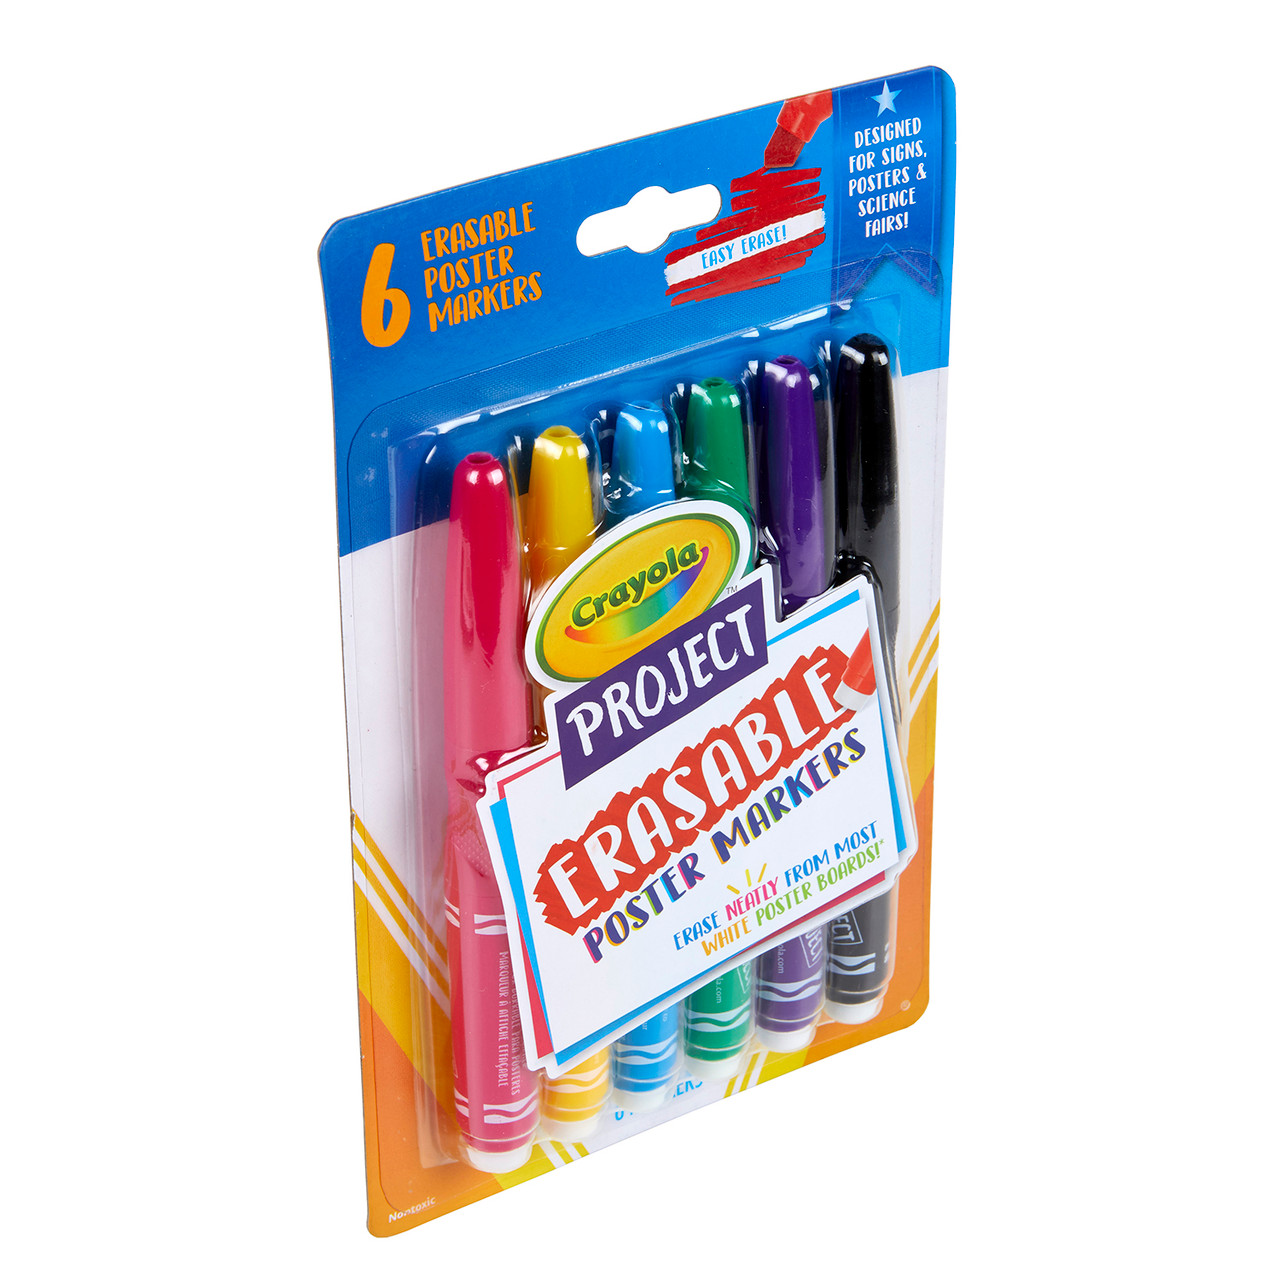 Project Erasable Poster Markers, Pack of 6 BIN588371  14.95 New